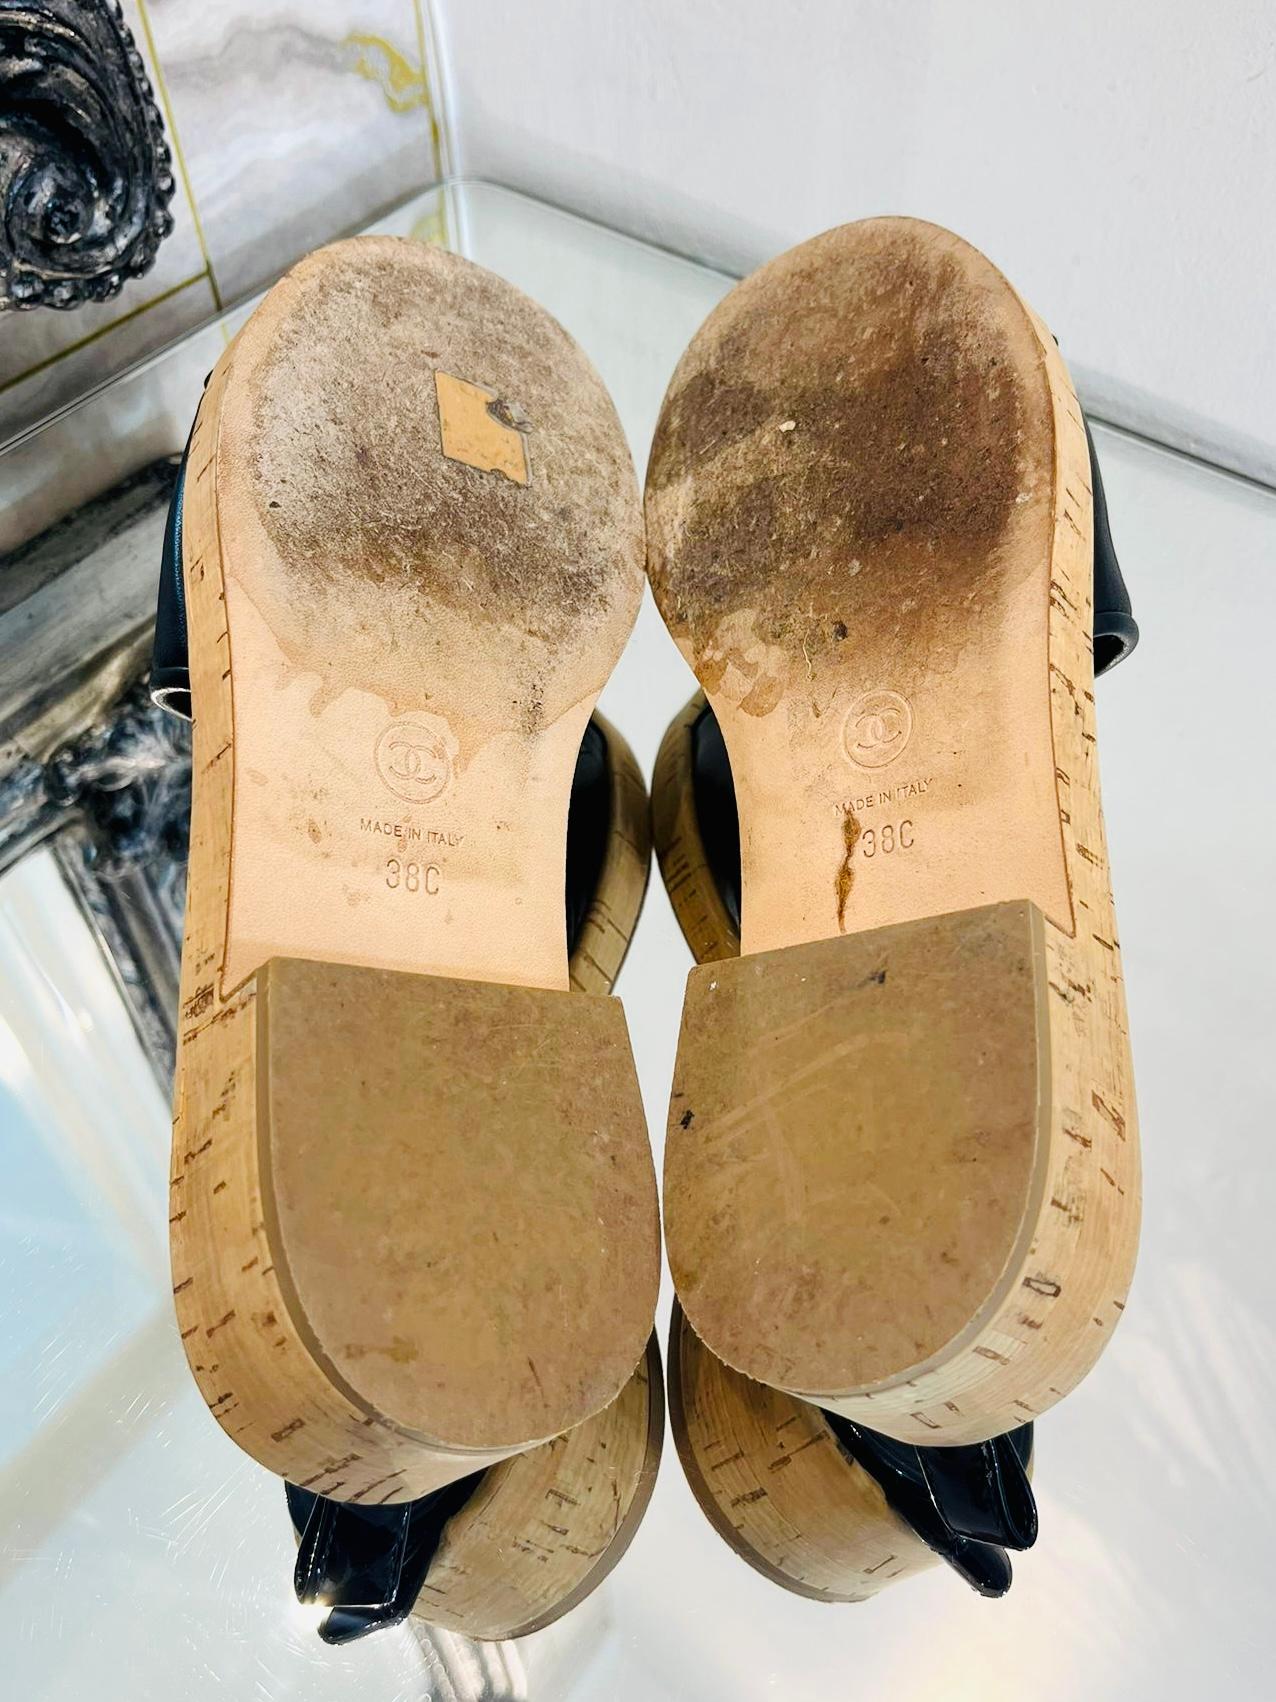 Chanel 'CC' Logo Leather Slides In Excellent Condition For Sale In London, GB